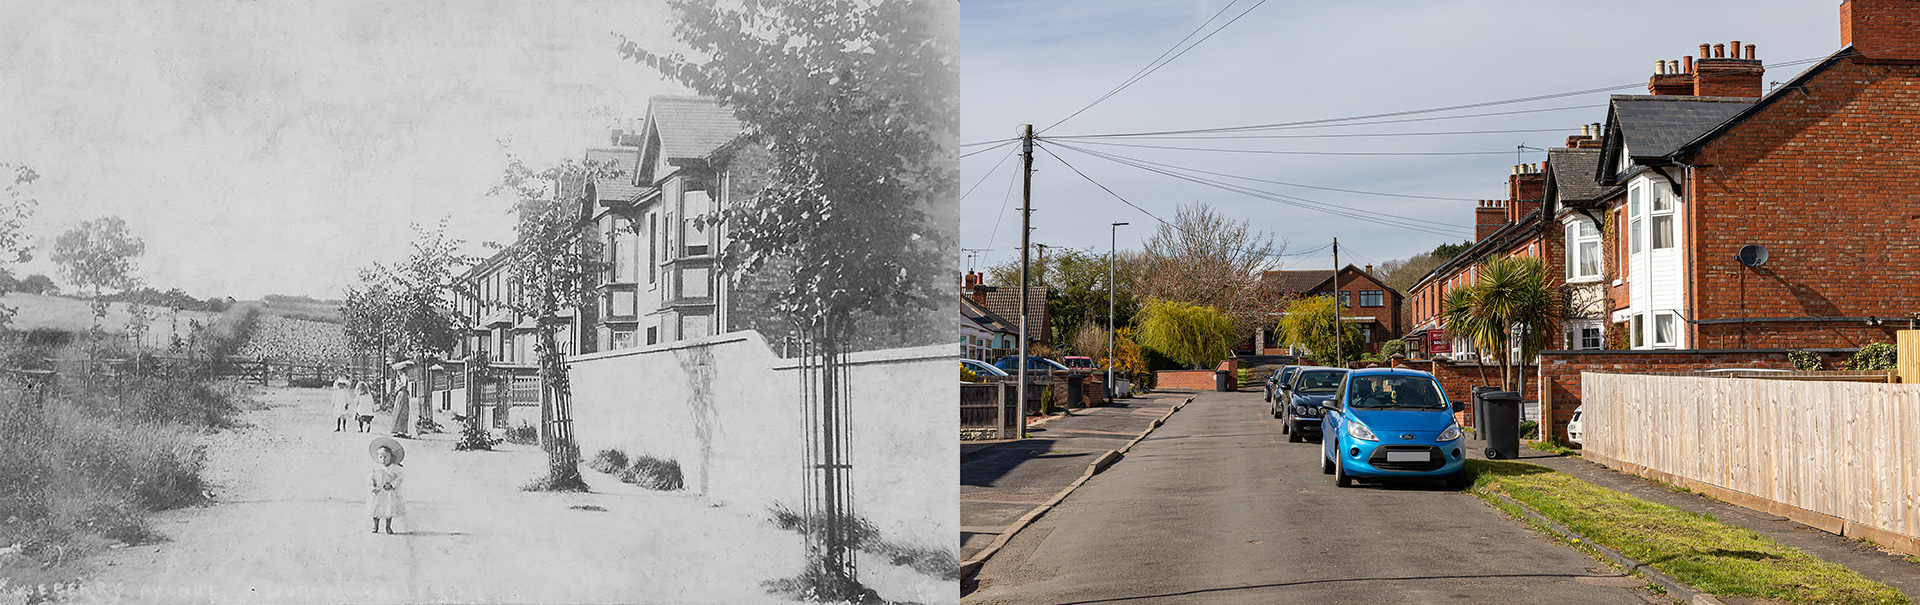 Asfordby Valley - Rosebery Avenue - Then and now